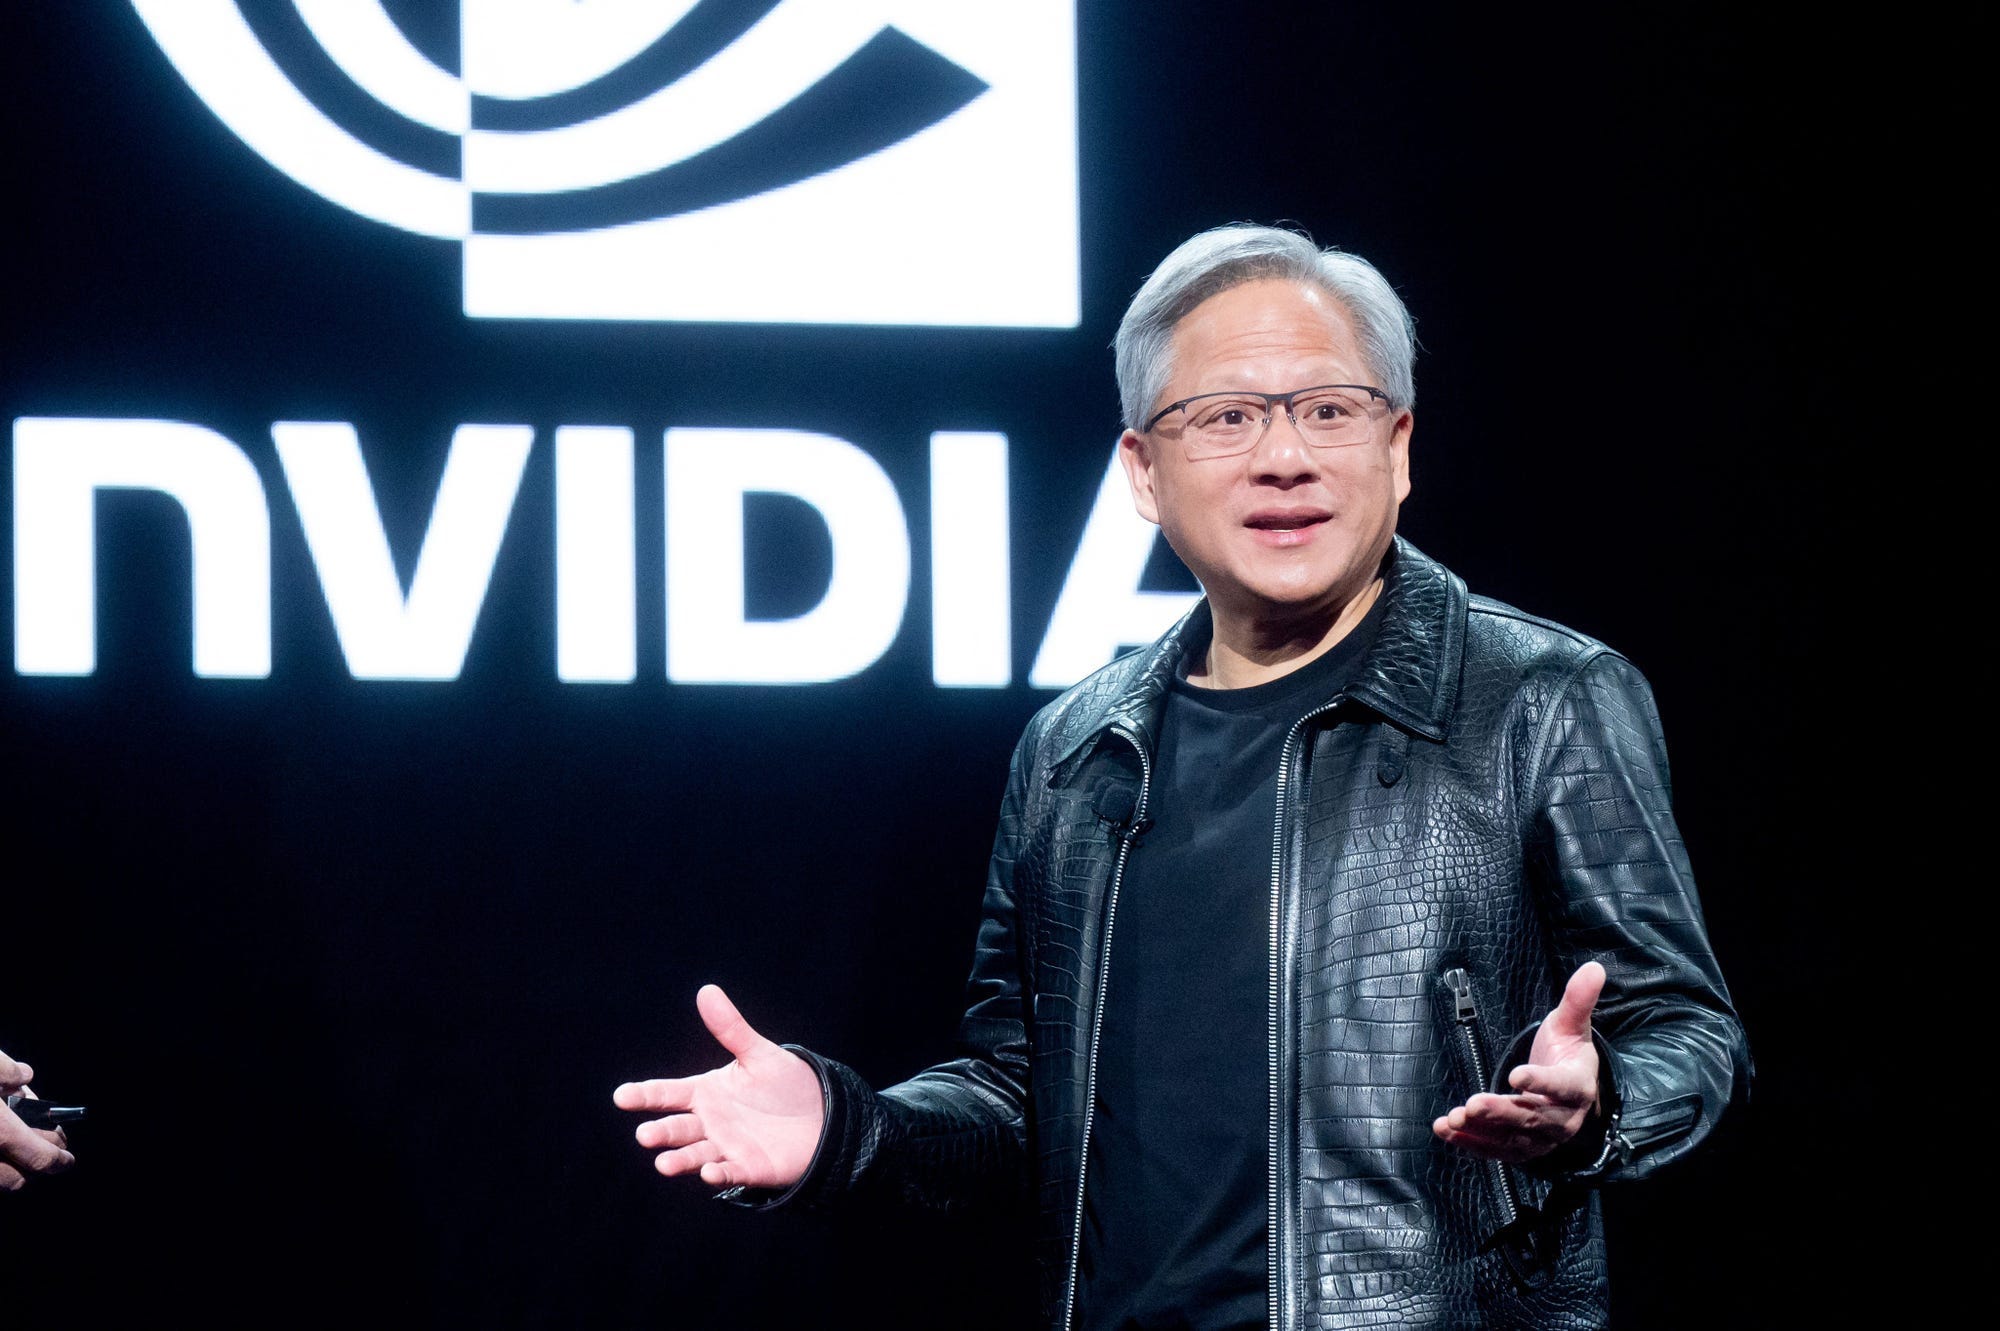 amazon, every country needs its own ai systems, says nvidia ceo jensen huang